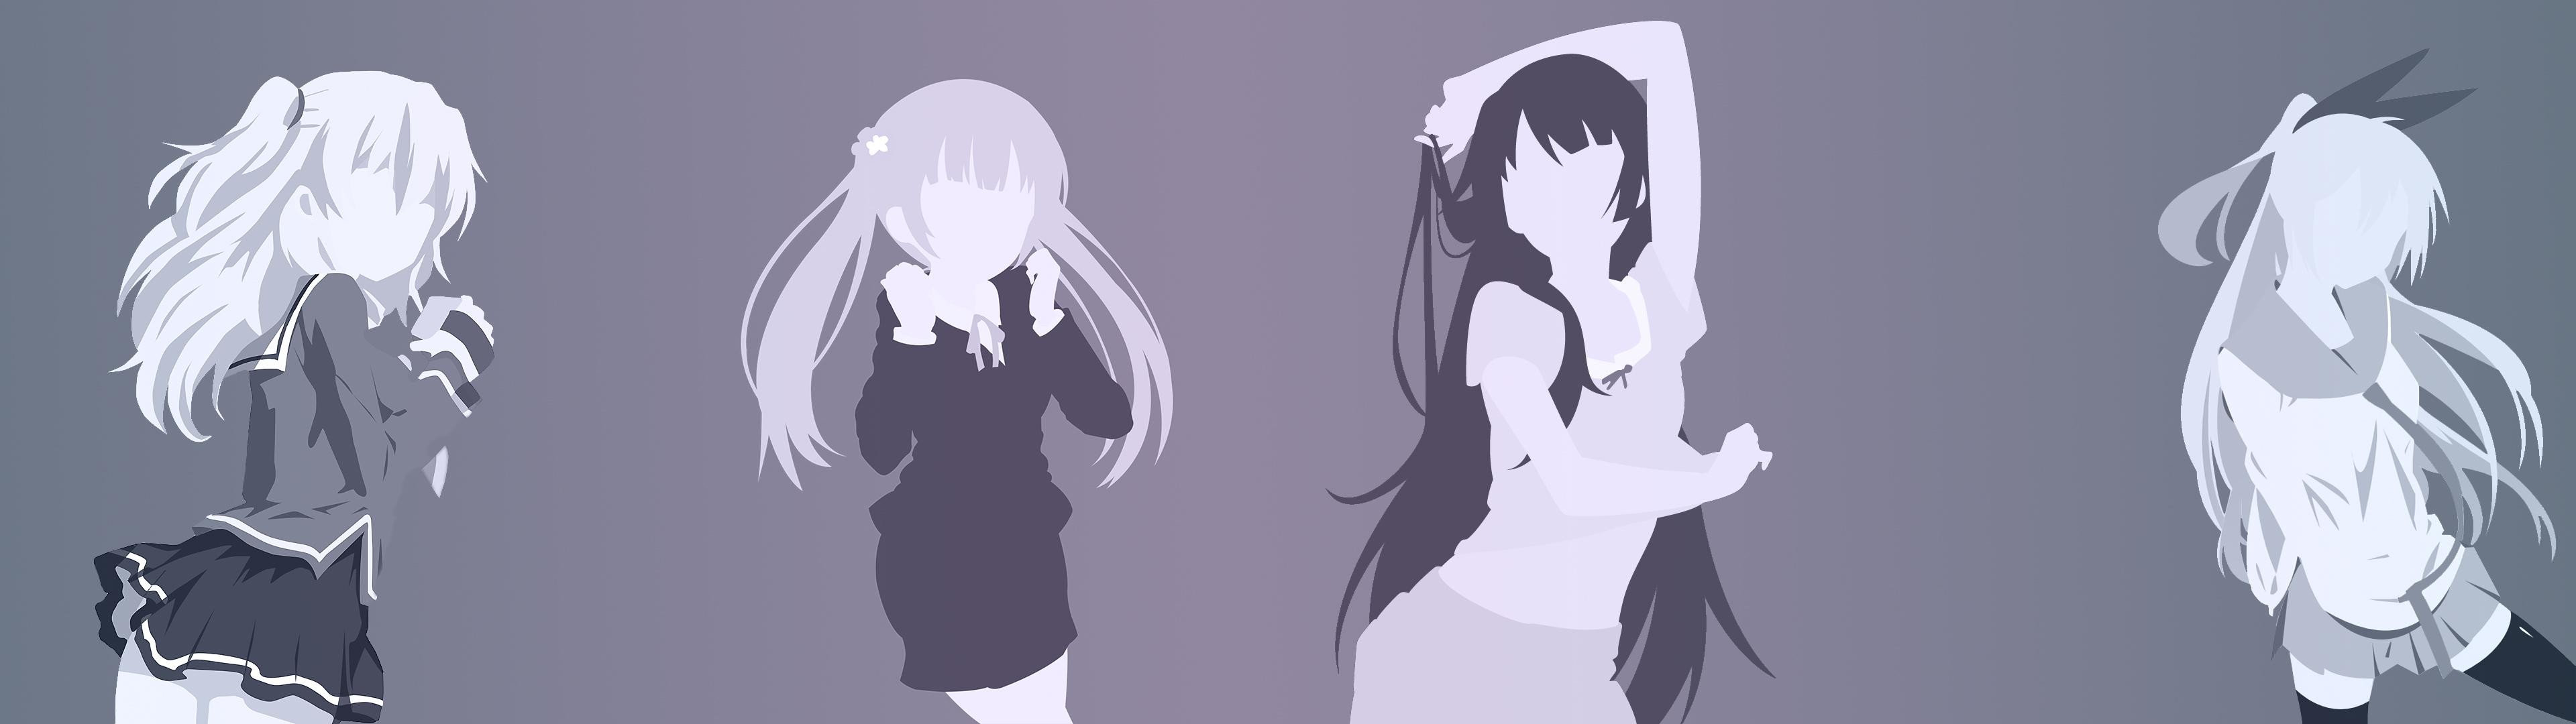 SimplisticStyled Girls from Different Animes 3840×1080 HD Wallpaper From Gallsource.com